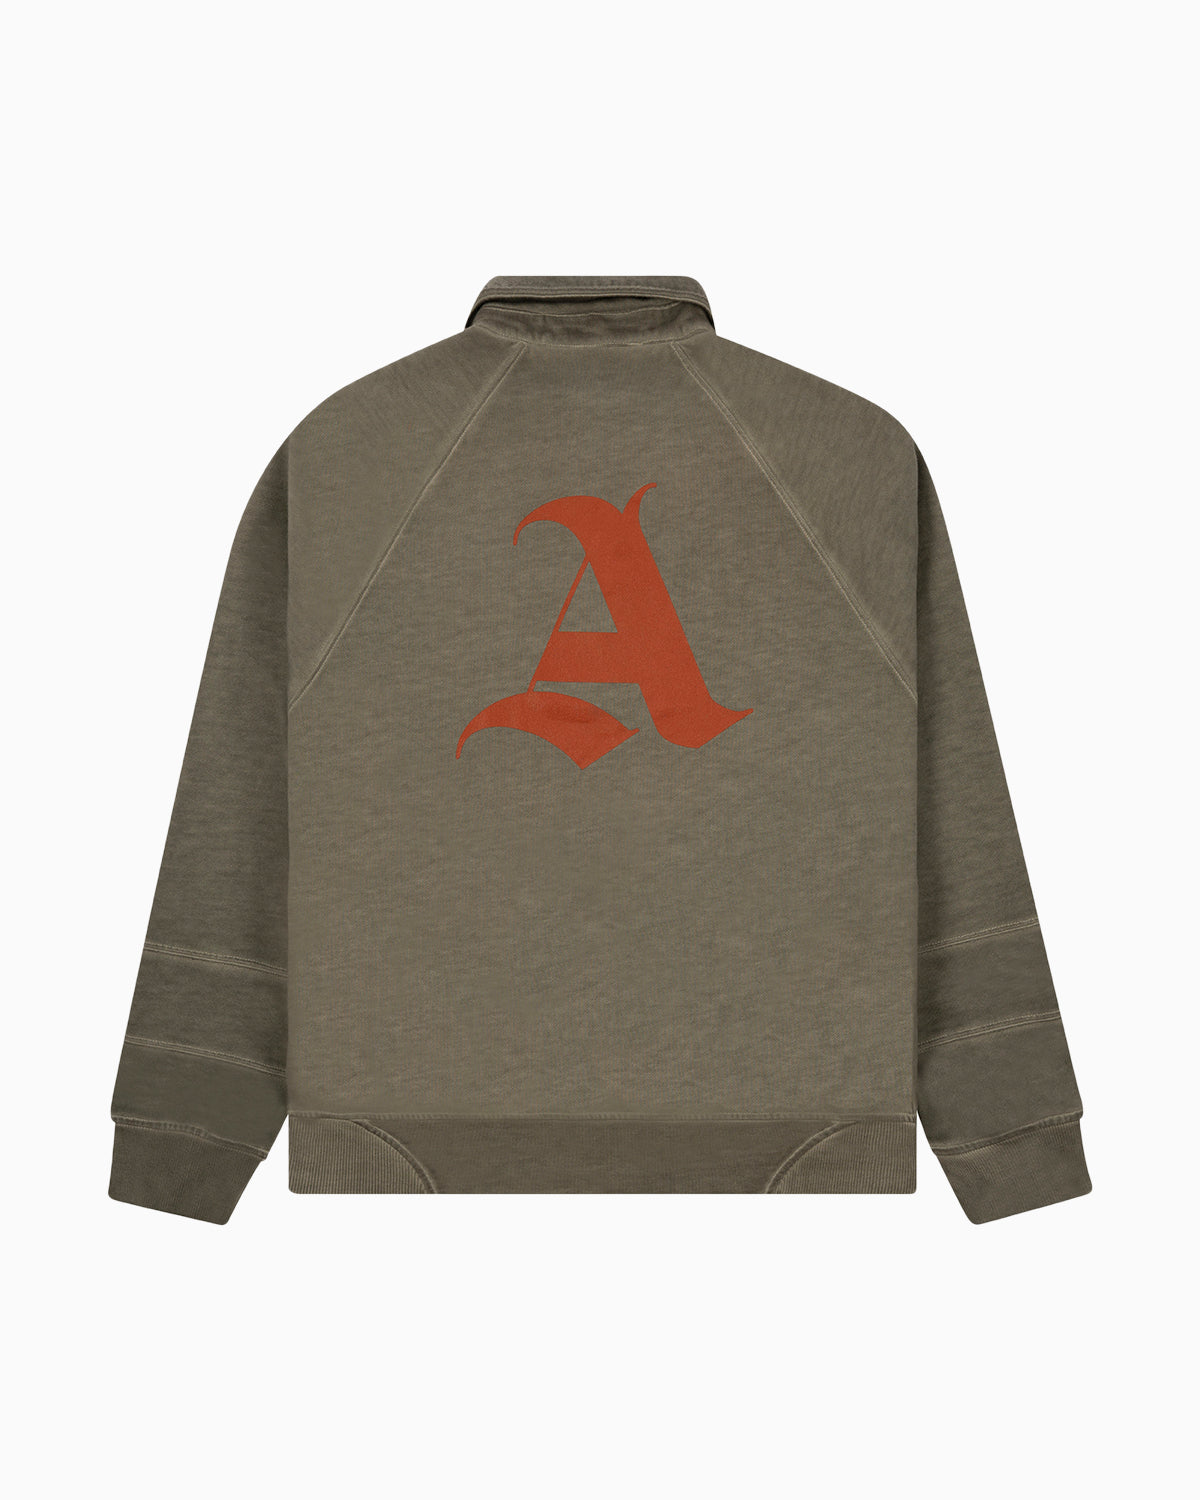 Back View of August Pullover Sweatshirt and Printed signature 'A' logo by Aseye Studio